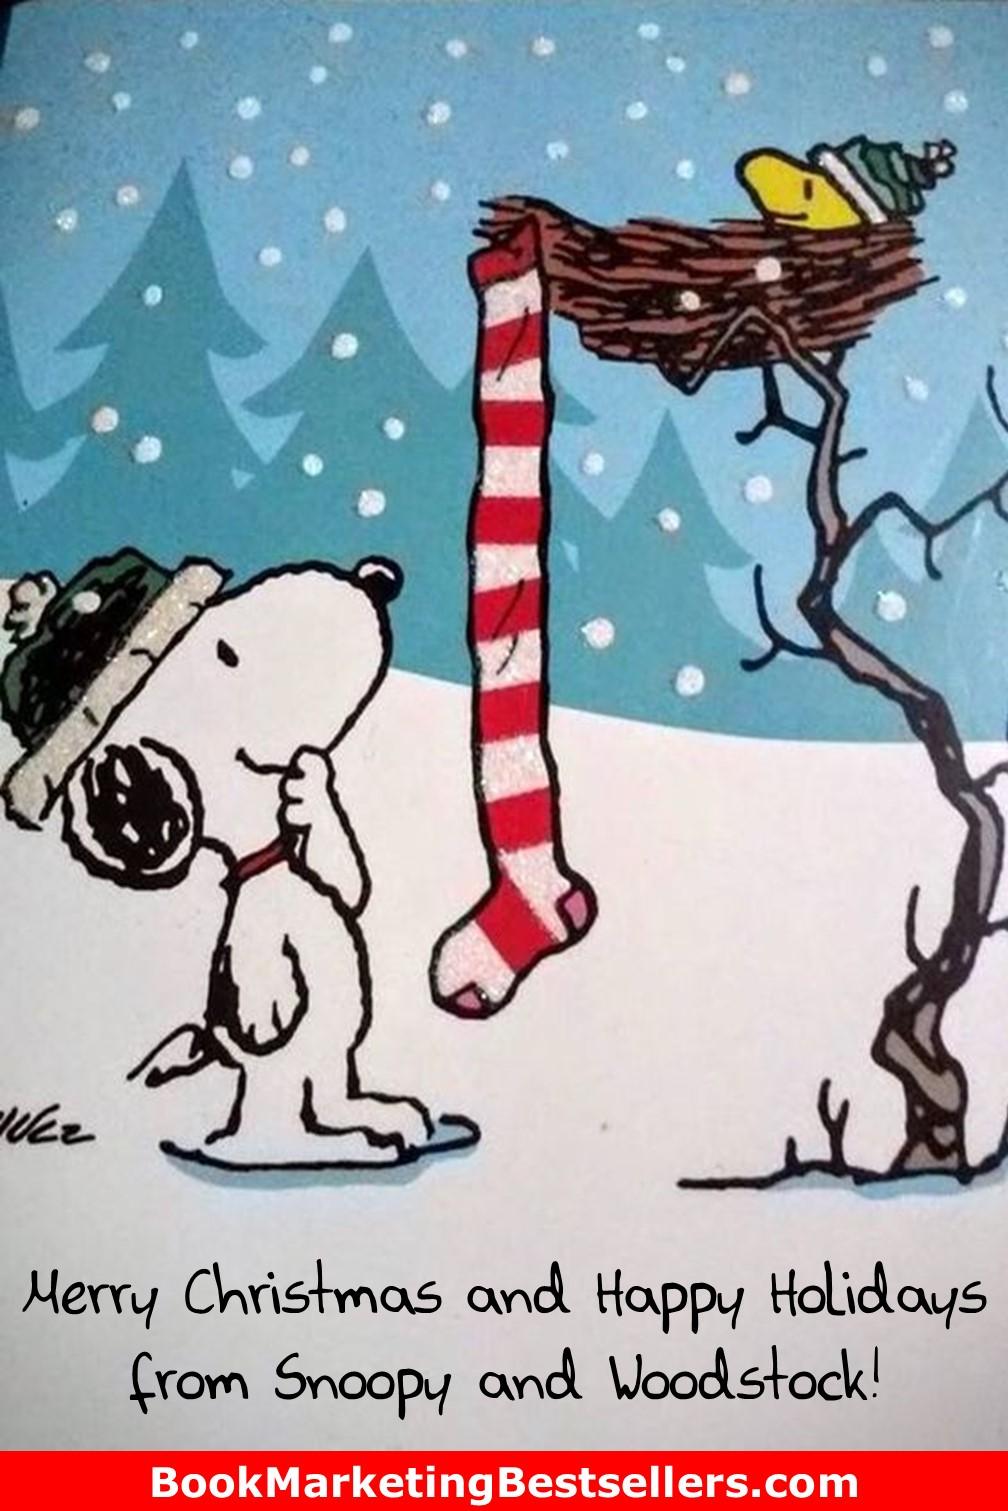 Merry Christmas And Happy Holidays From Snoopy Woodstock